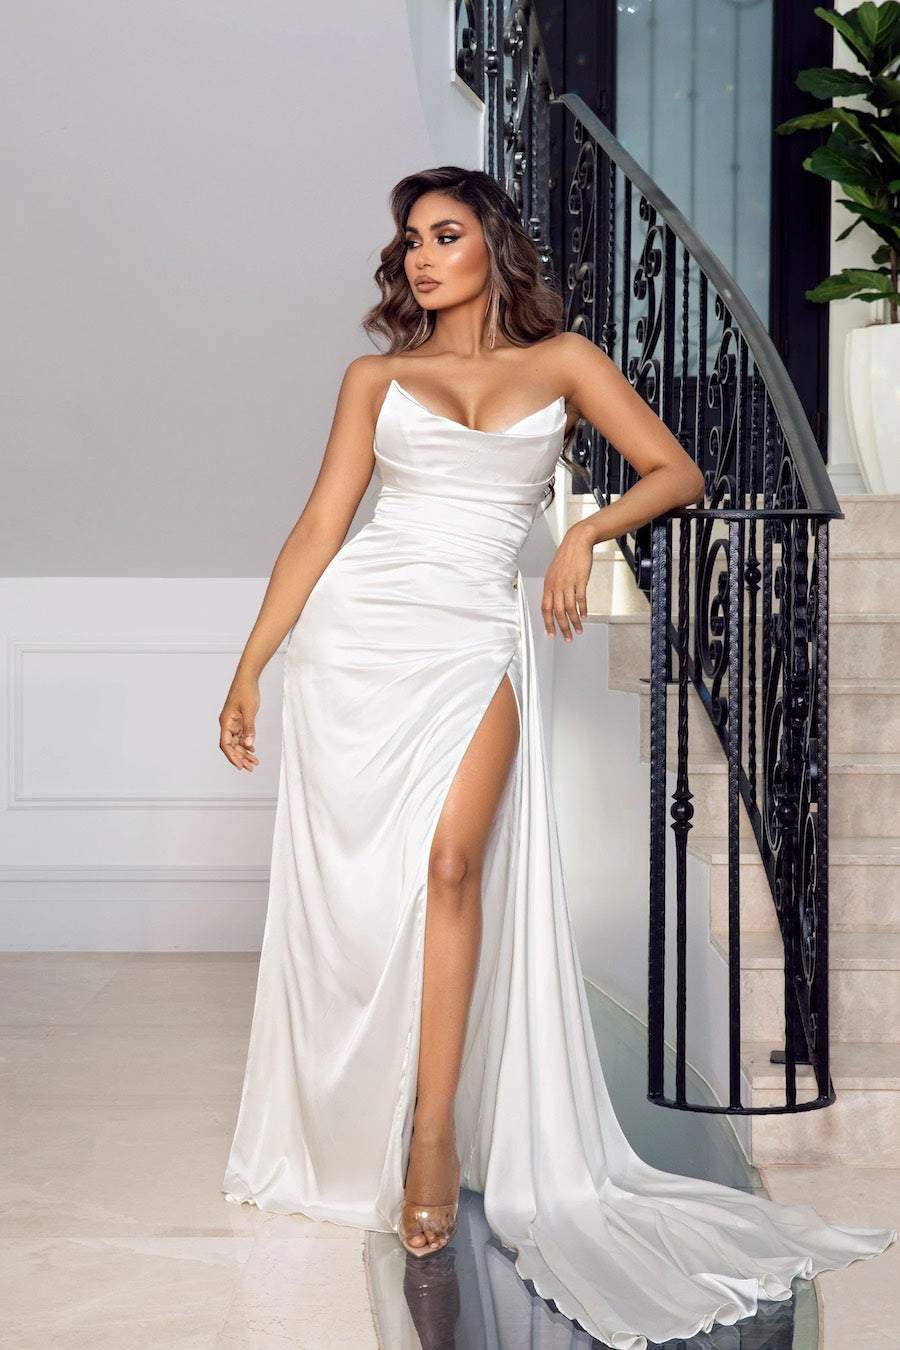 Shop 2022 White Formal Dresses and Gowns | Terry Costa